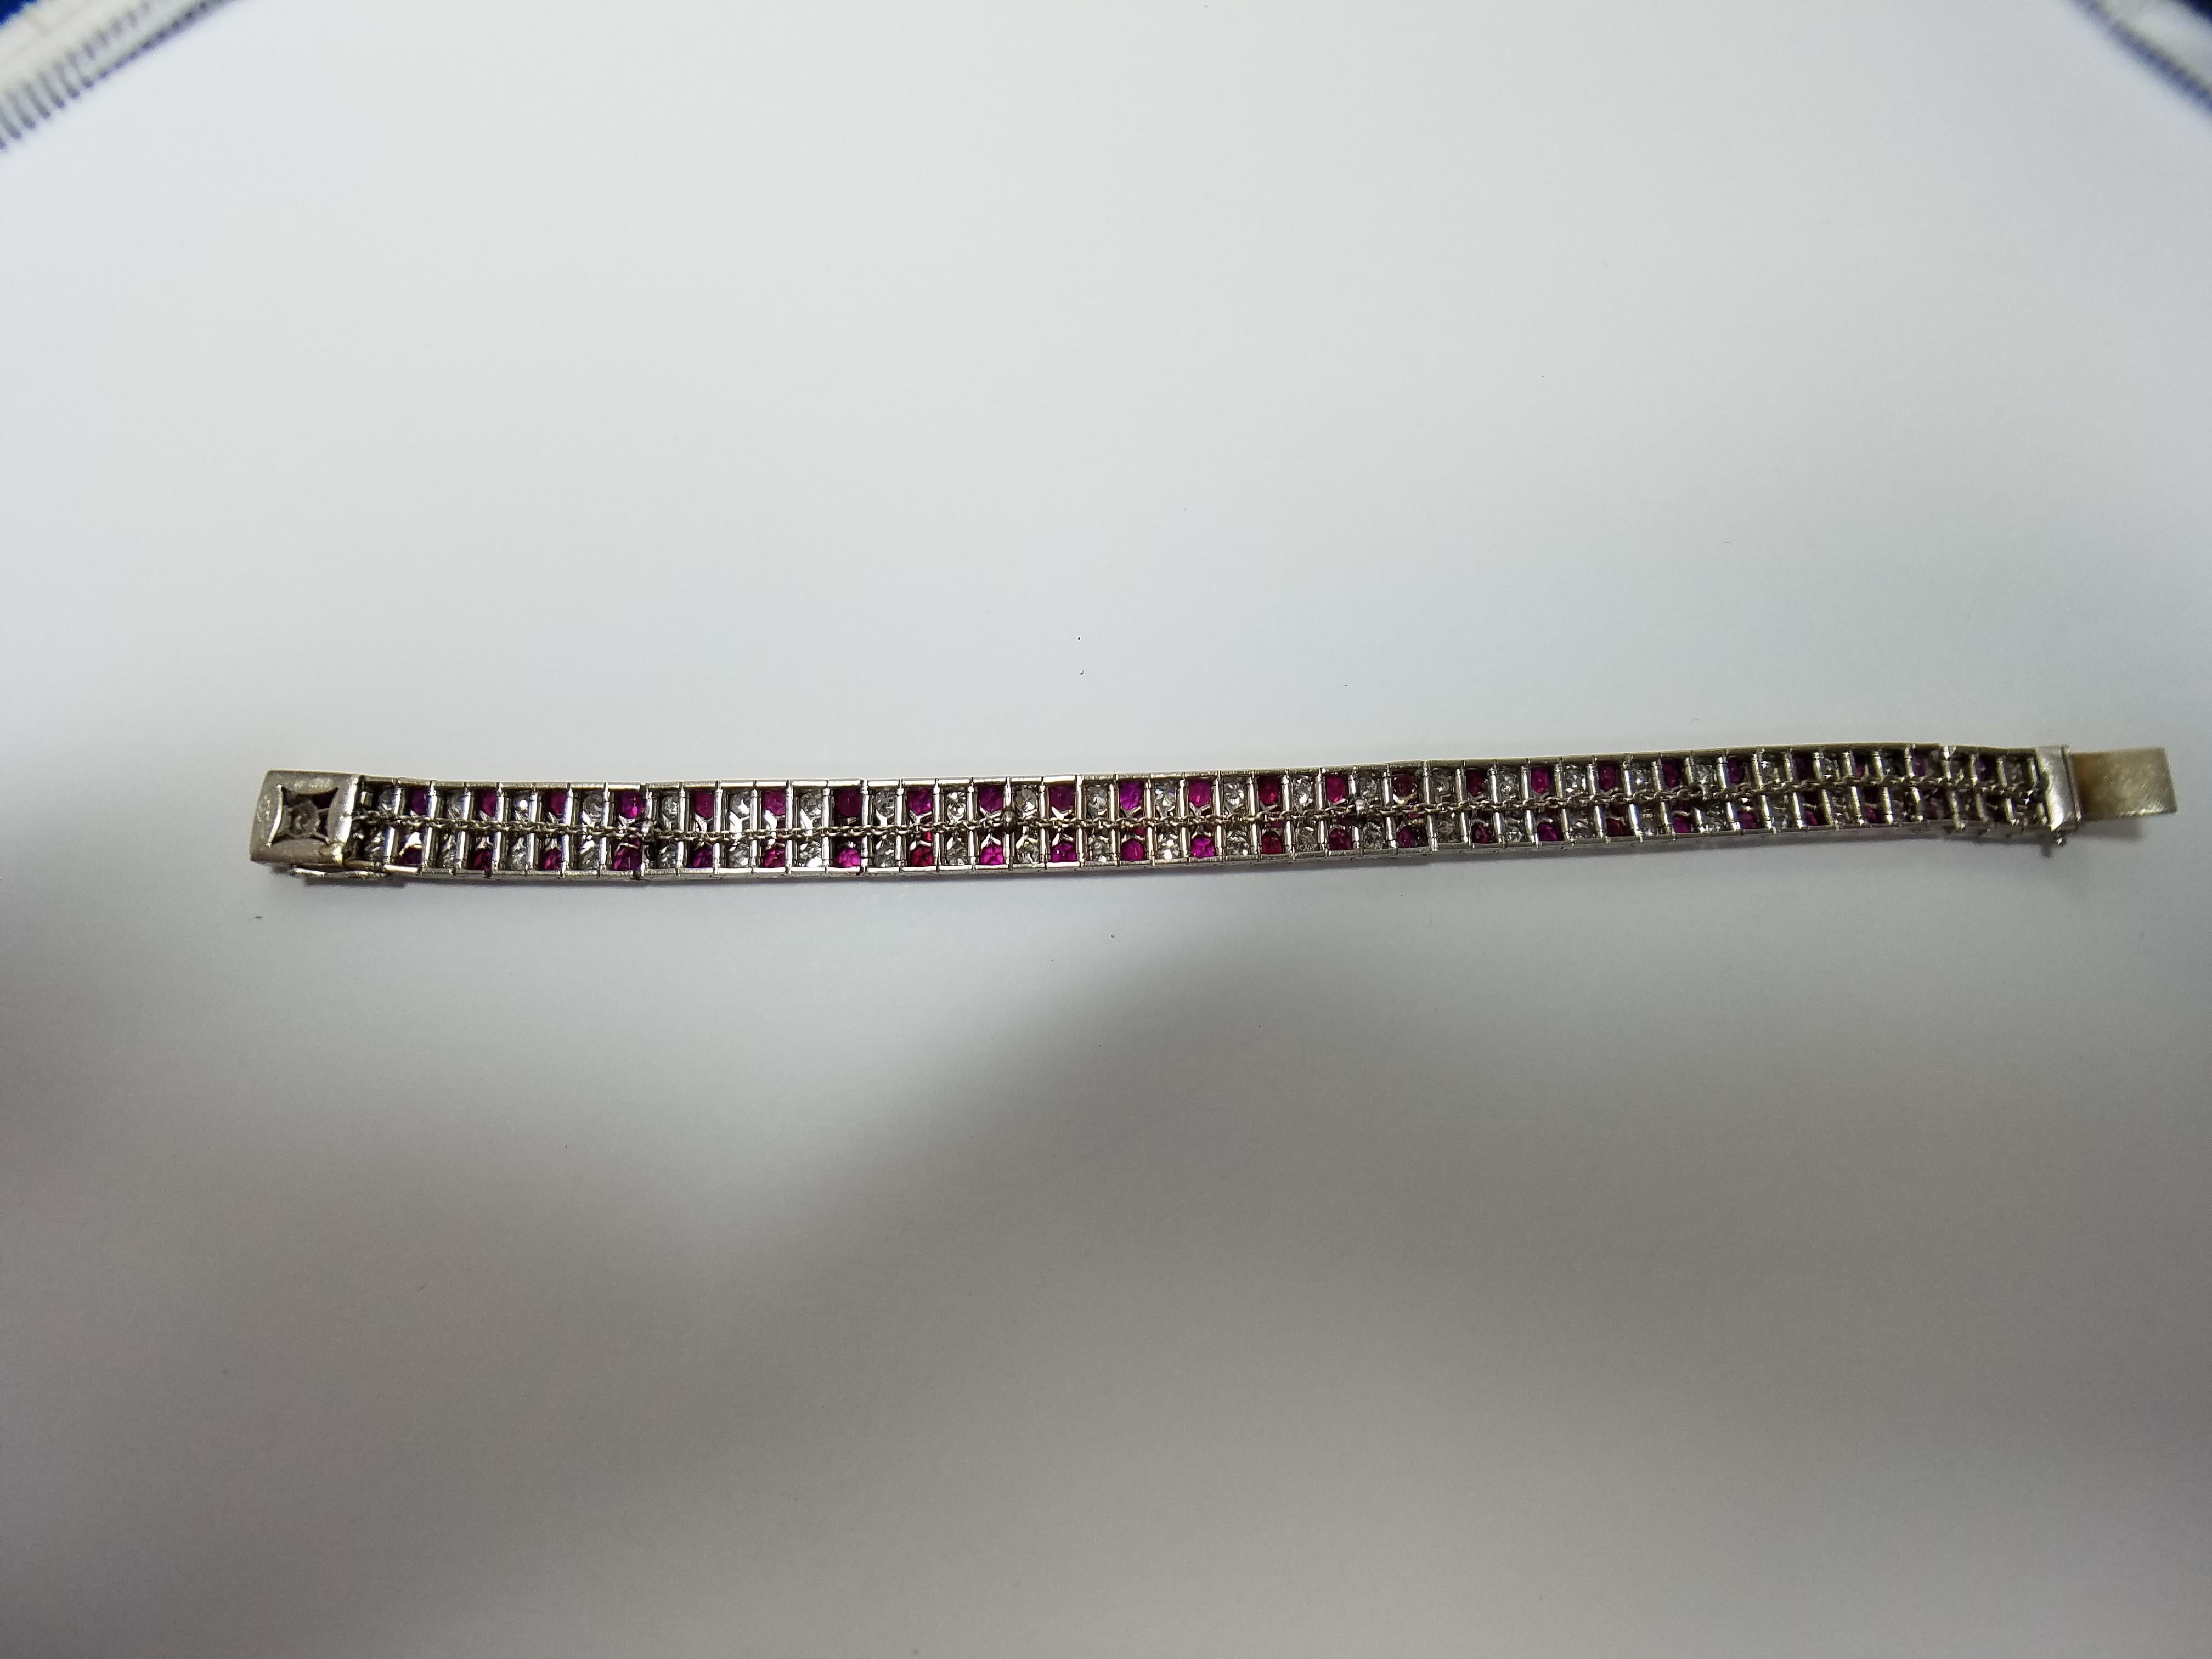 Platinum bracelet with 78 Burma Rubies weight aprox 8 carats and 81 Old European Cut White Diamonds weighing aprox 8 carat.